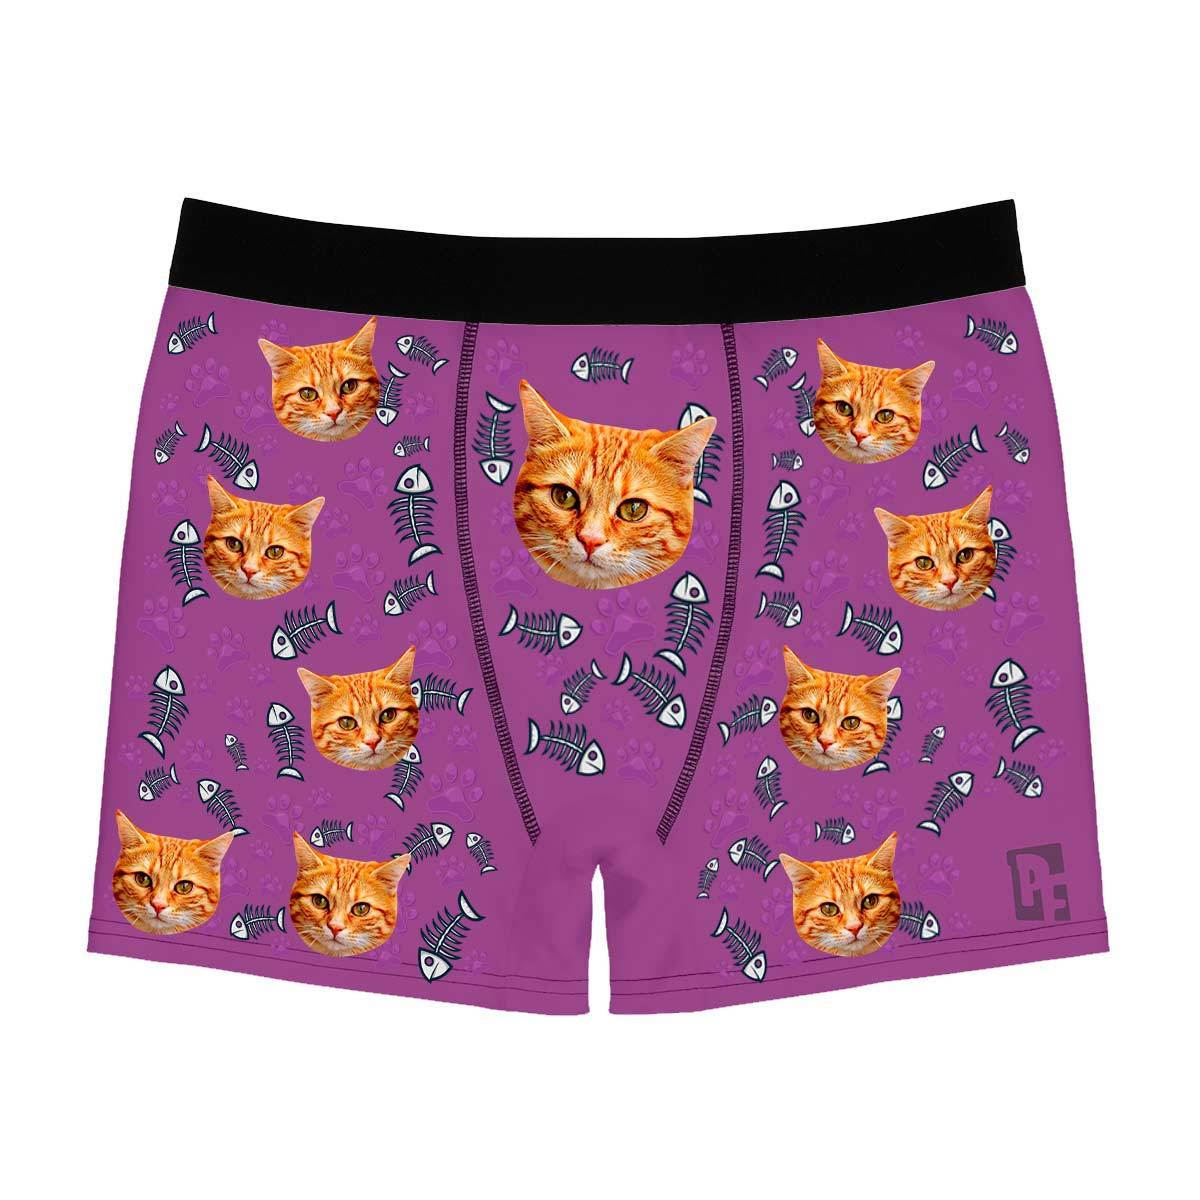 Red Cat men's boxer briefs personalized with photo printed on them